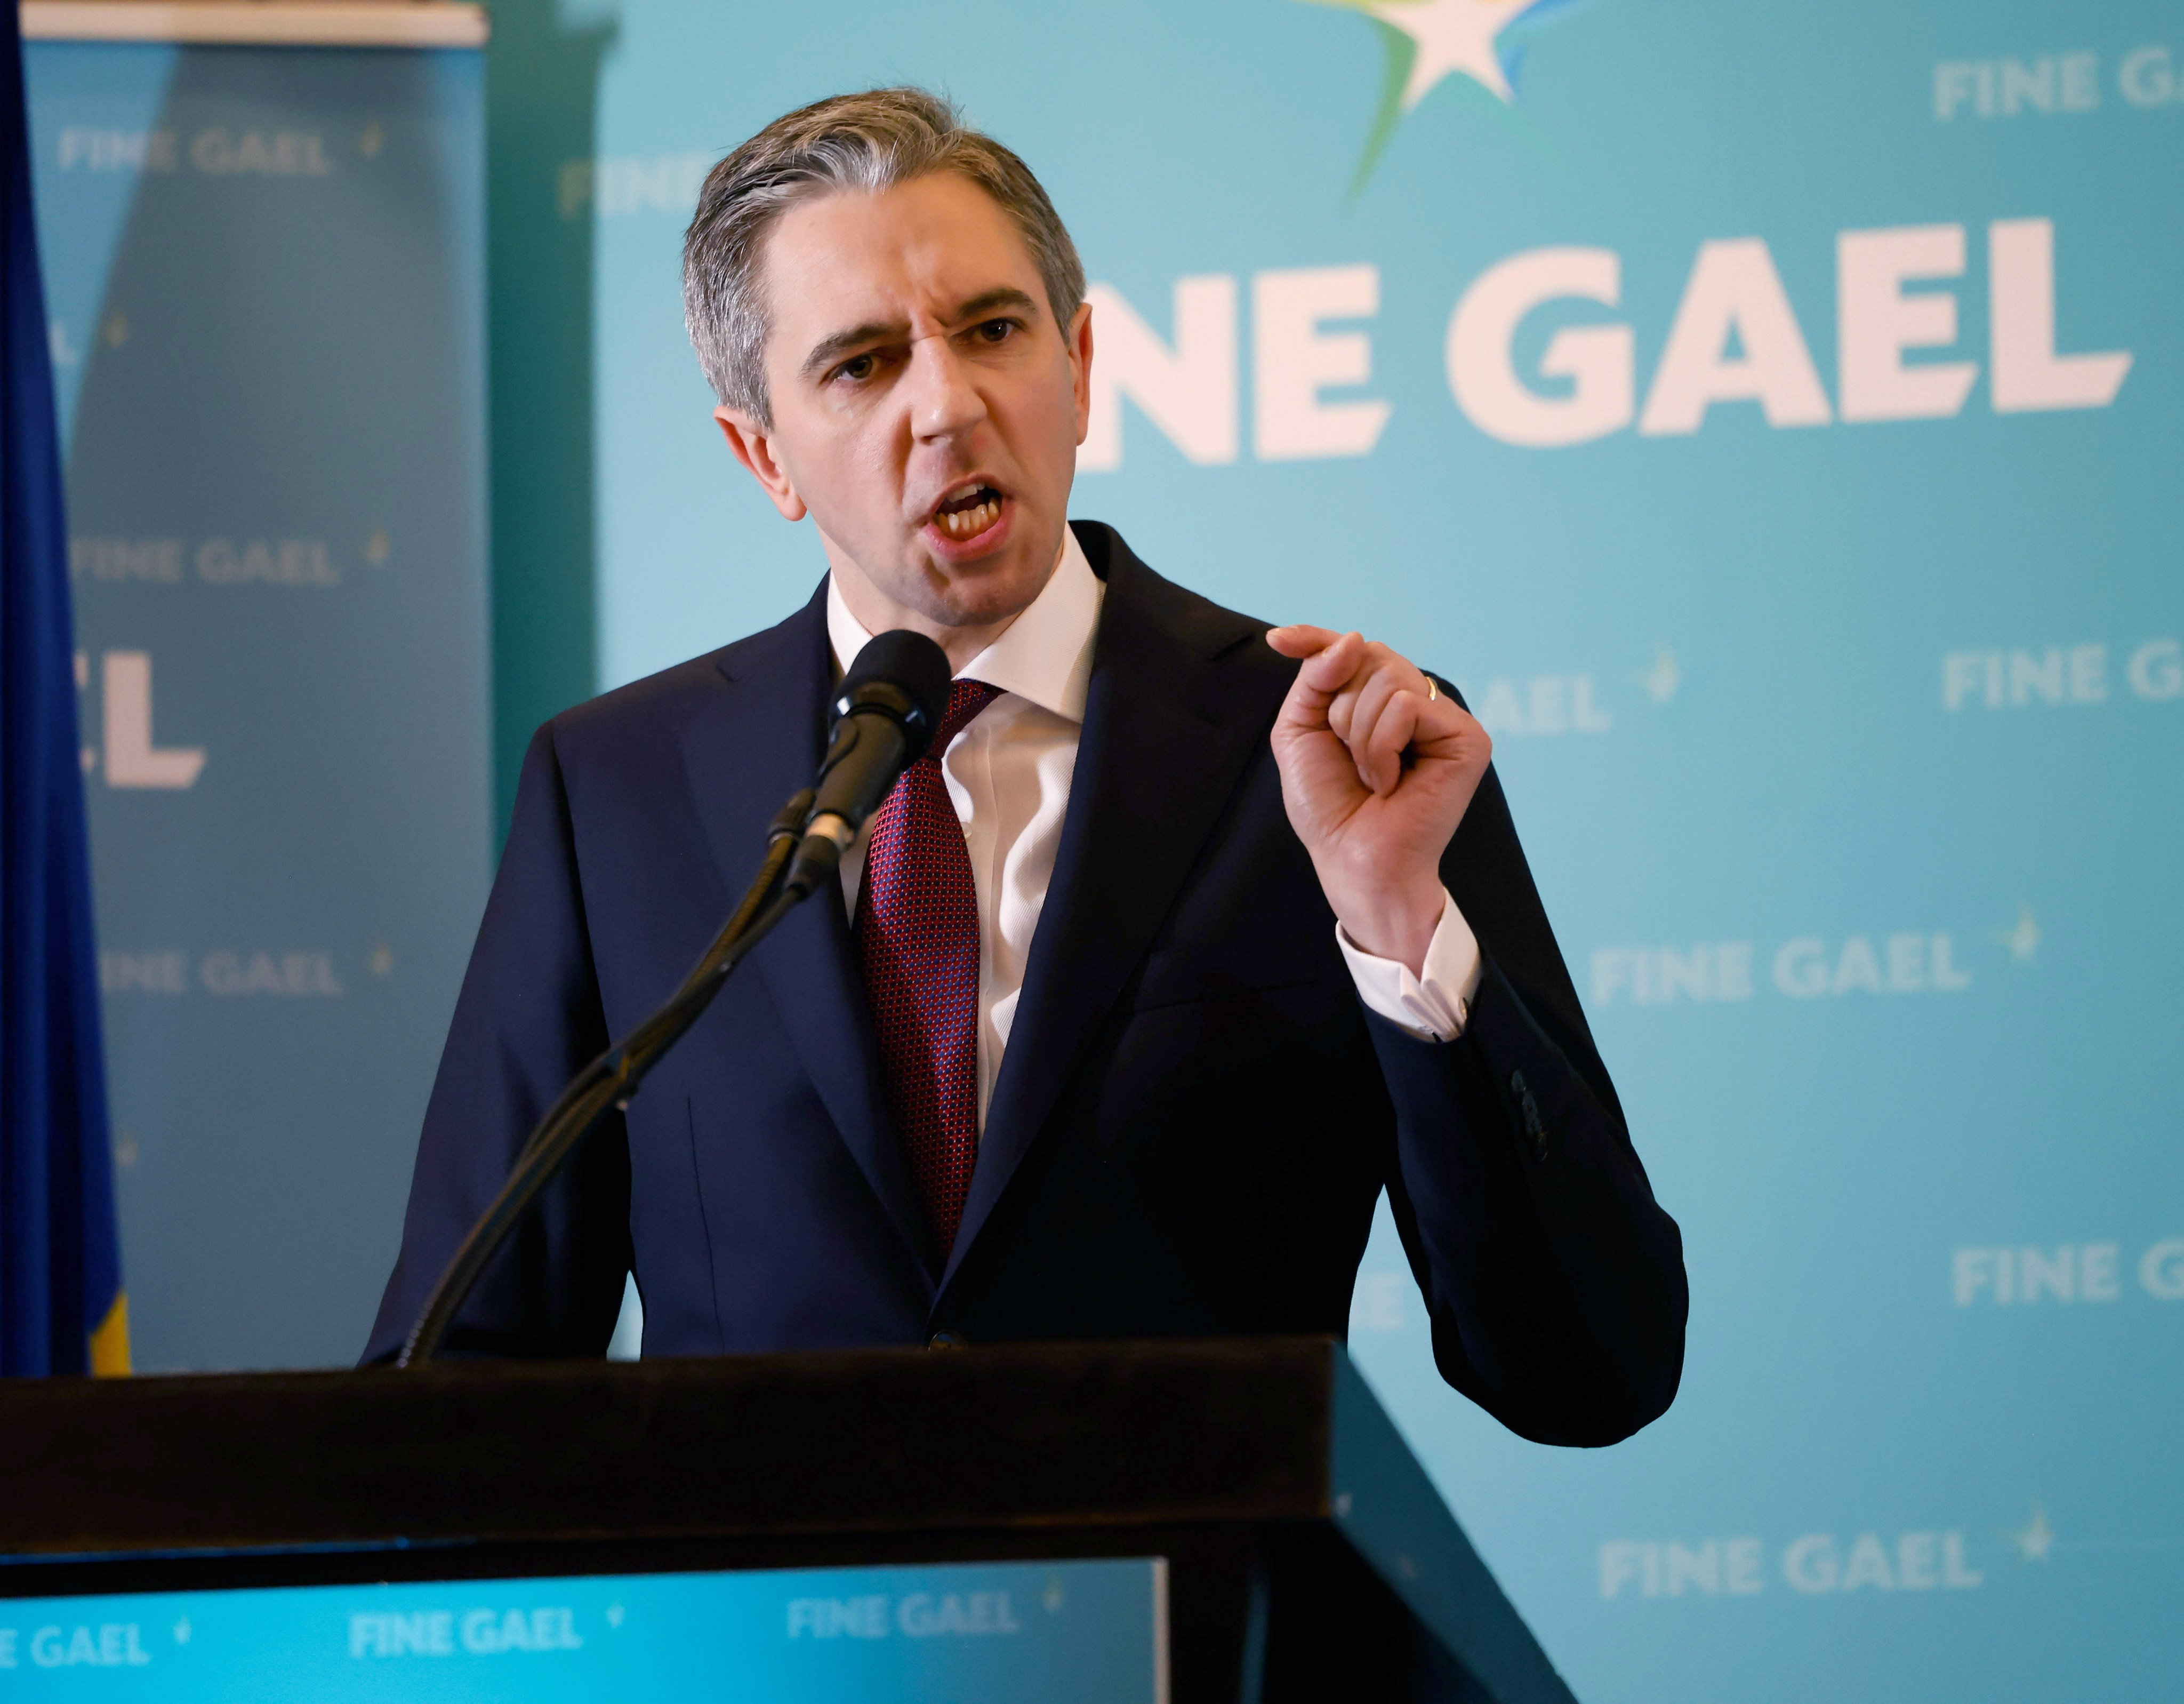 Ireland’s Further and Higher Education Minister Simon Harris addresses the audience after he was declared the new leader of Fine Gael at the Sheraton Hotel in Athlone, Ireland on Sunday. Photo: EPA-EFE